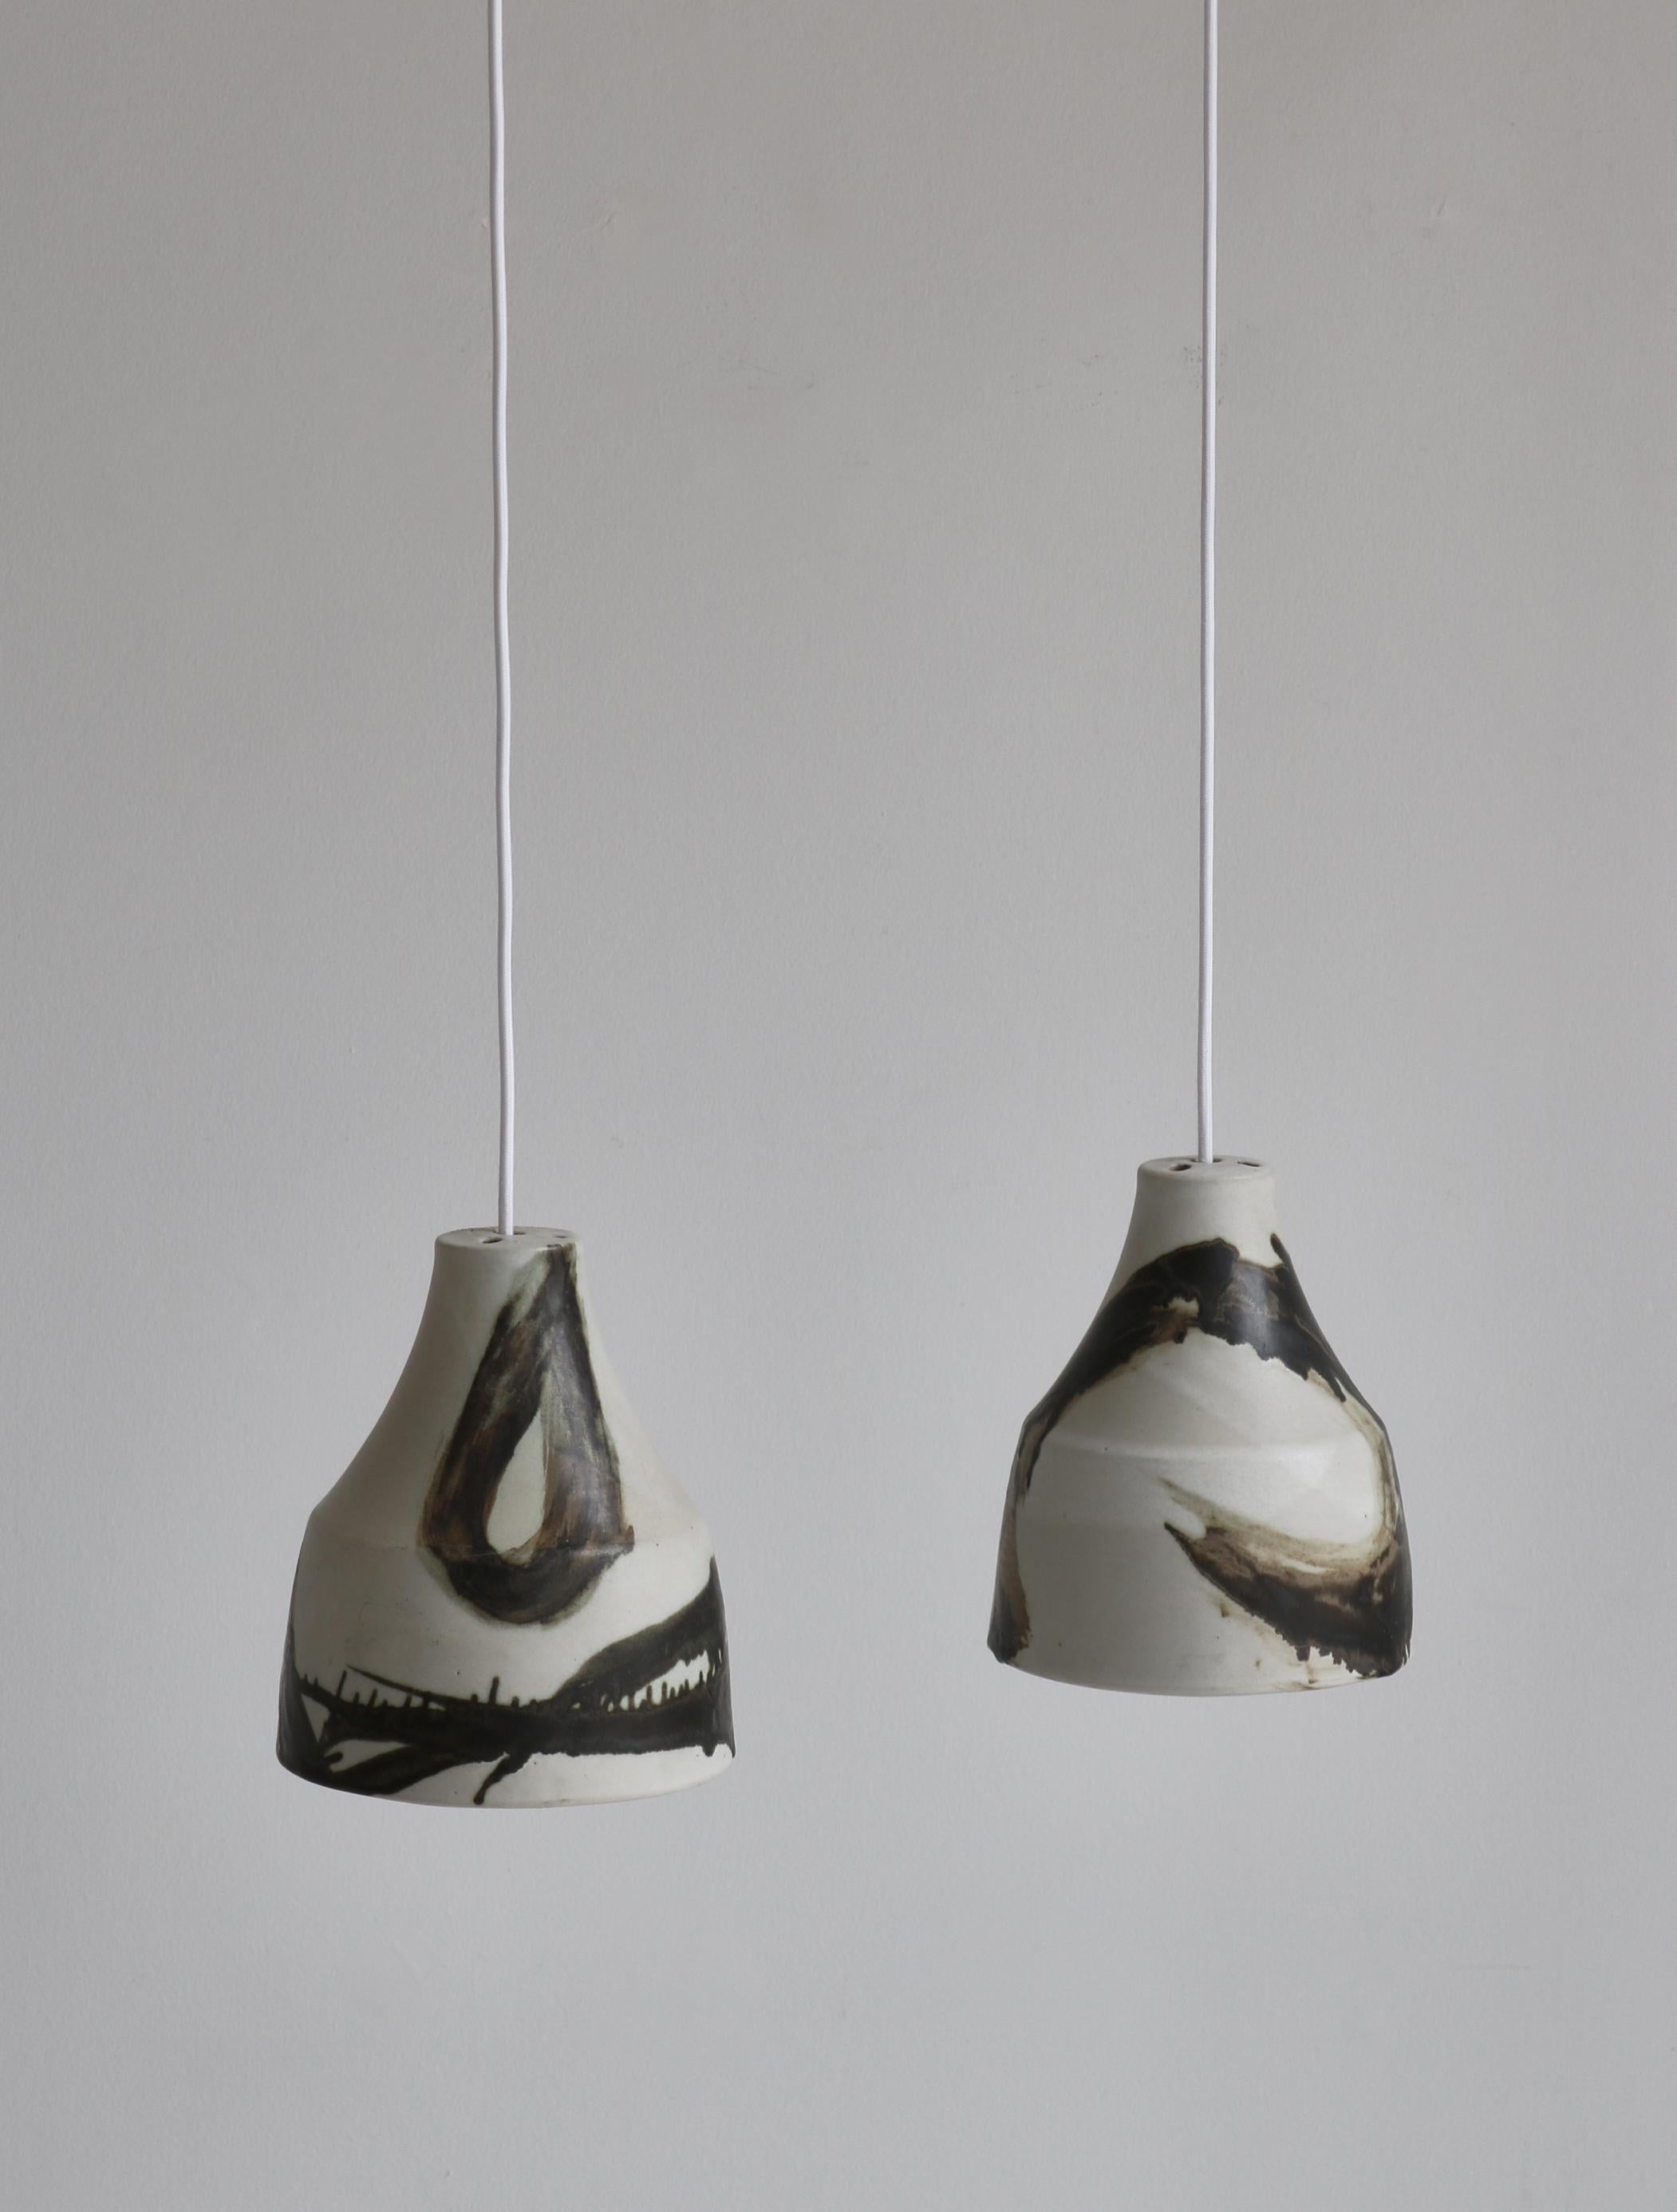 Beautiful pair of unique stoneware pendants in white and brown glazing handmade in Denmark in the 1960s. Attributed to Søholm Stentøj at the island of Bornholm, Denmark. 
The Søholm Pottery on the small island of Bornholm in Denmark was established